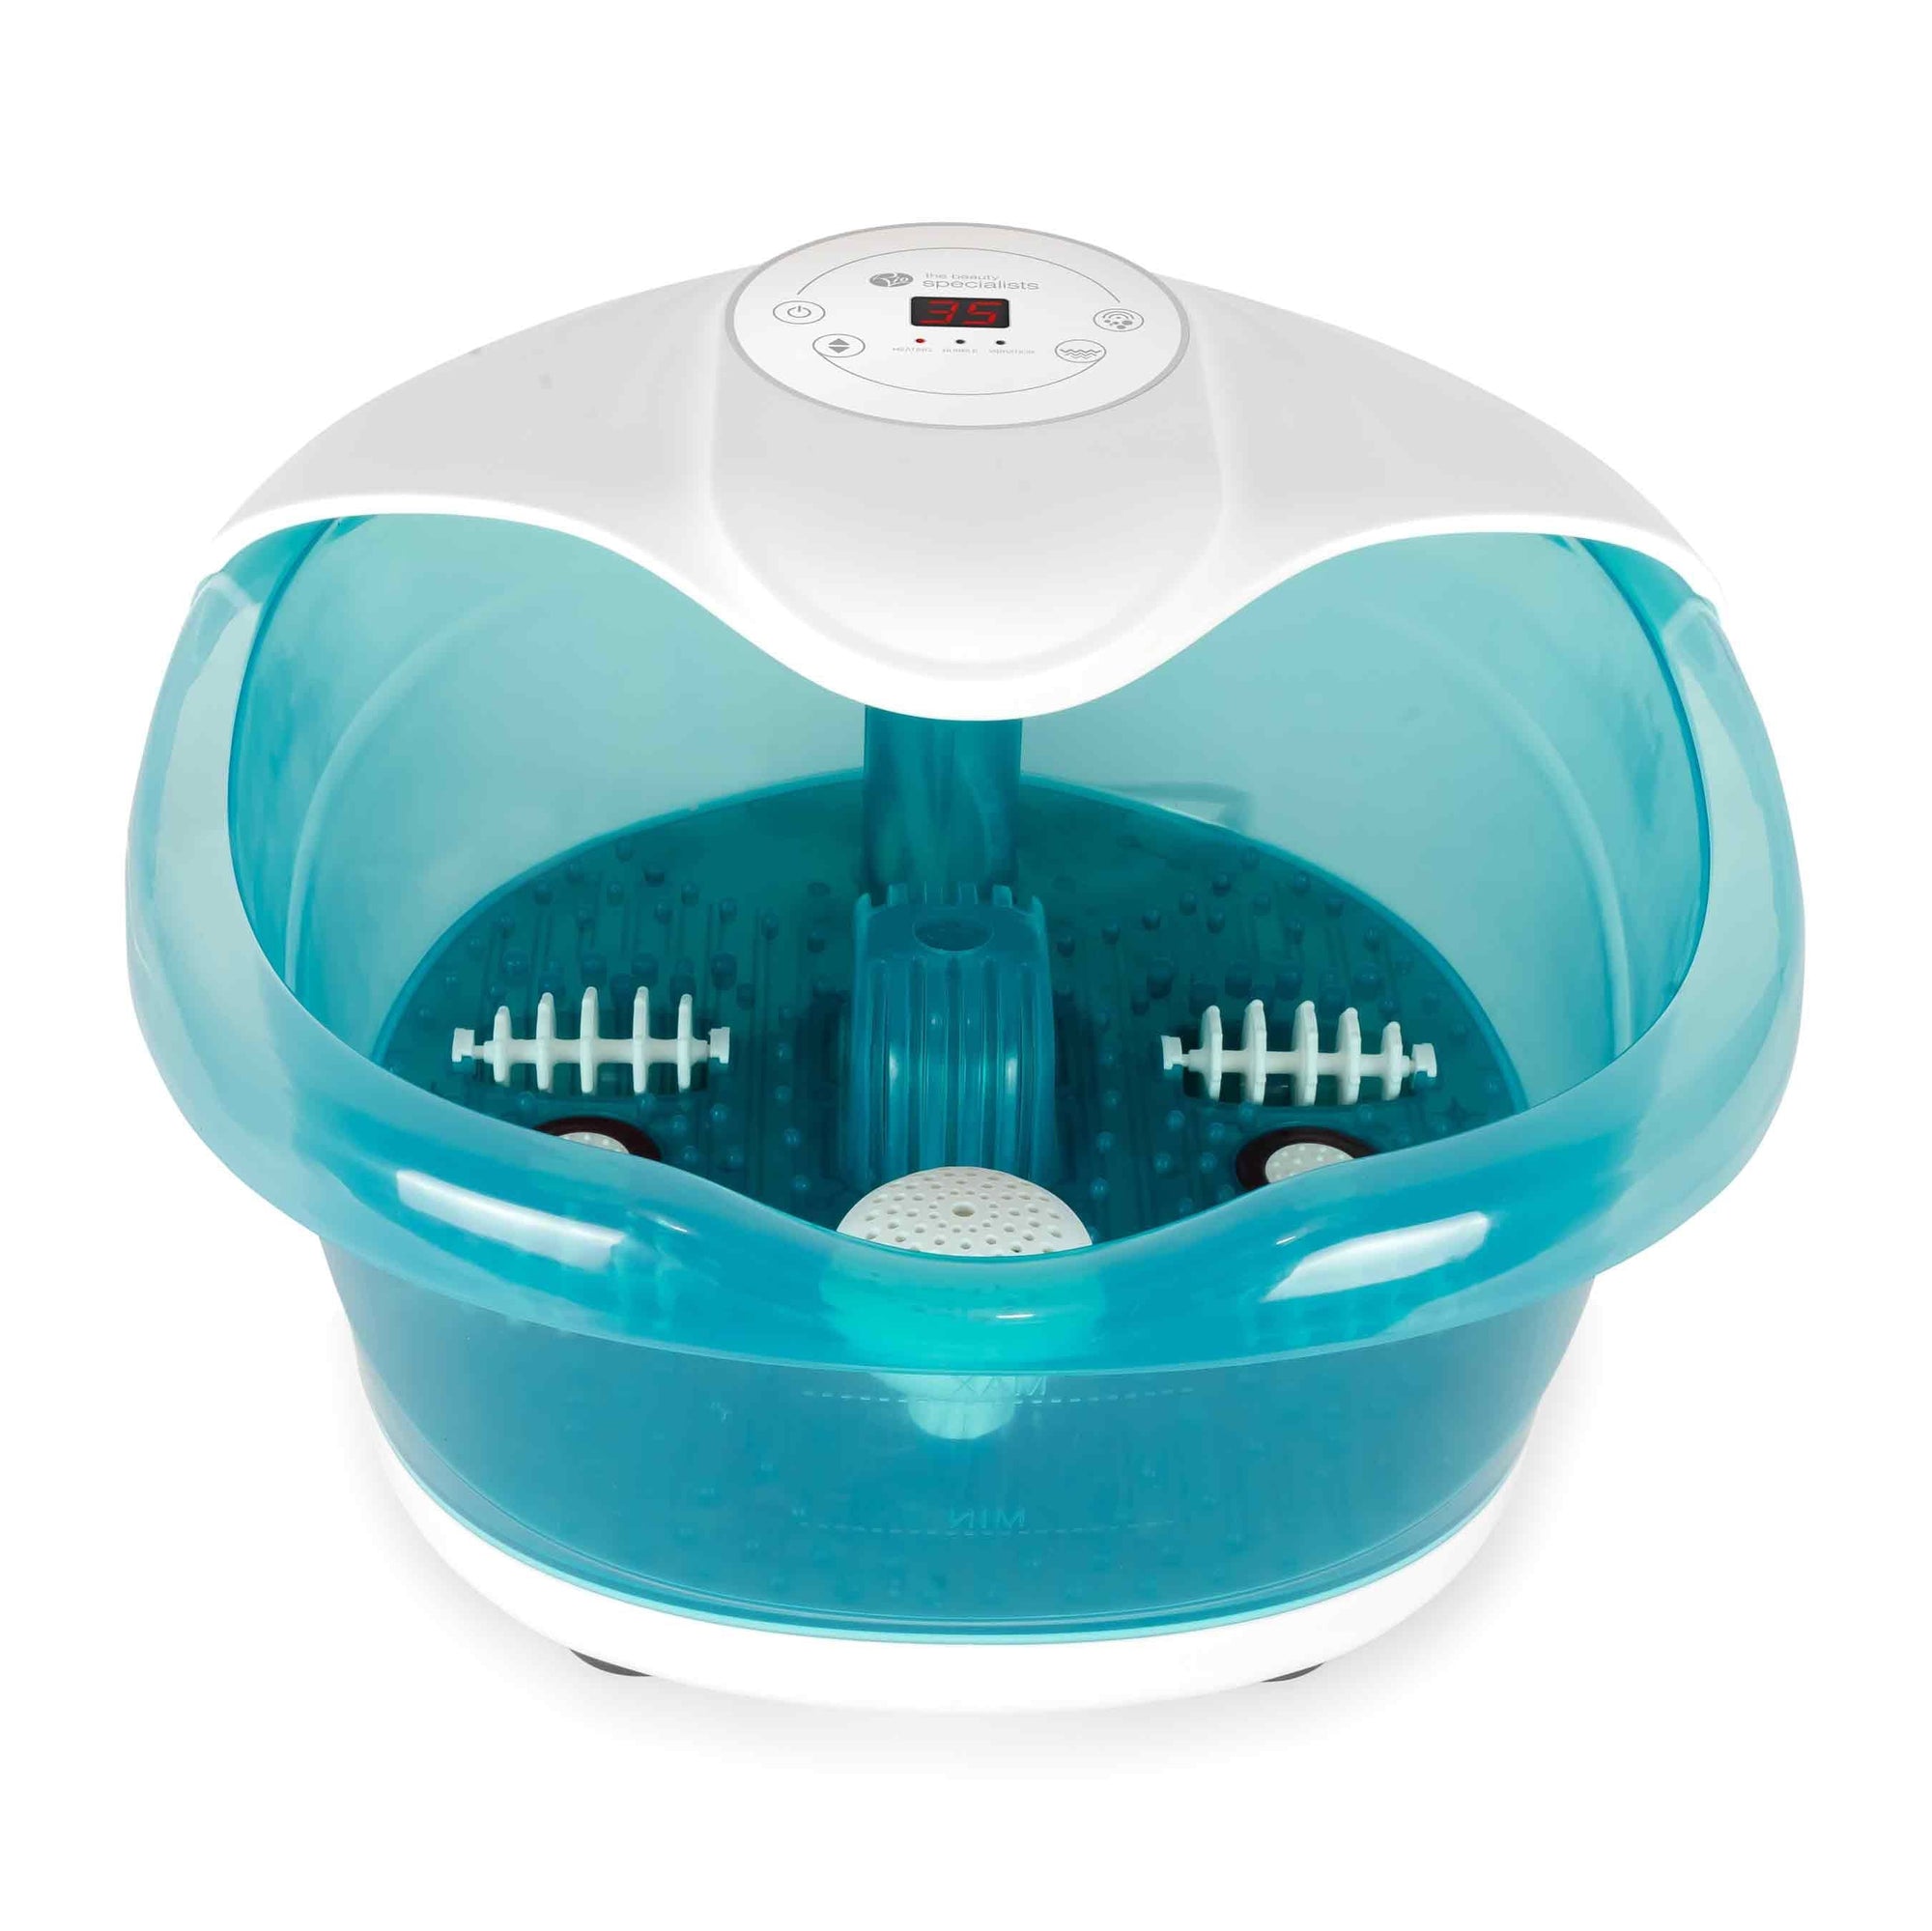 Luxury foot bath spa and massager with auto heat-up